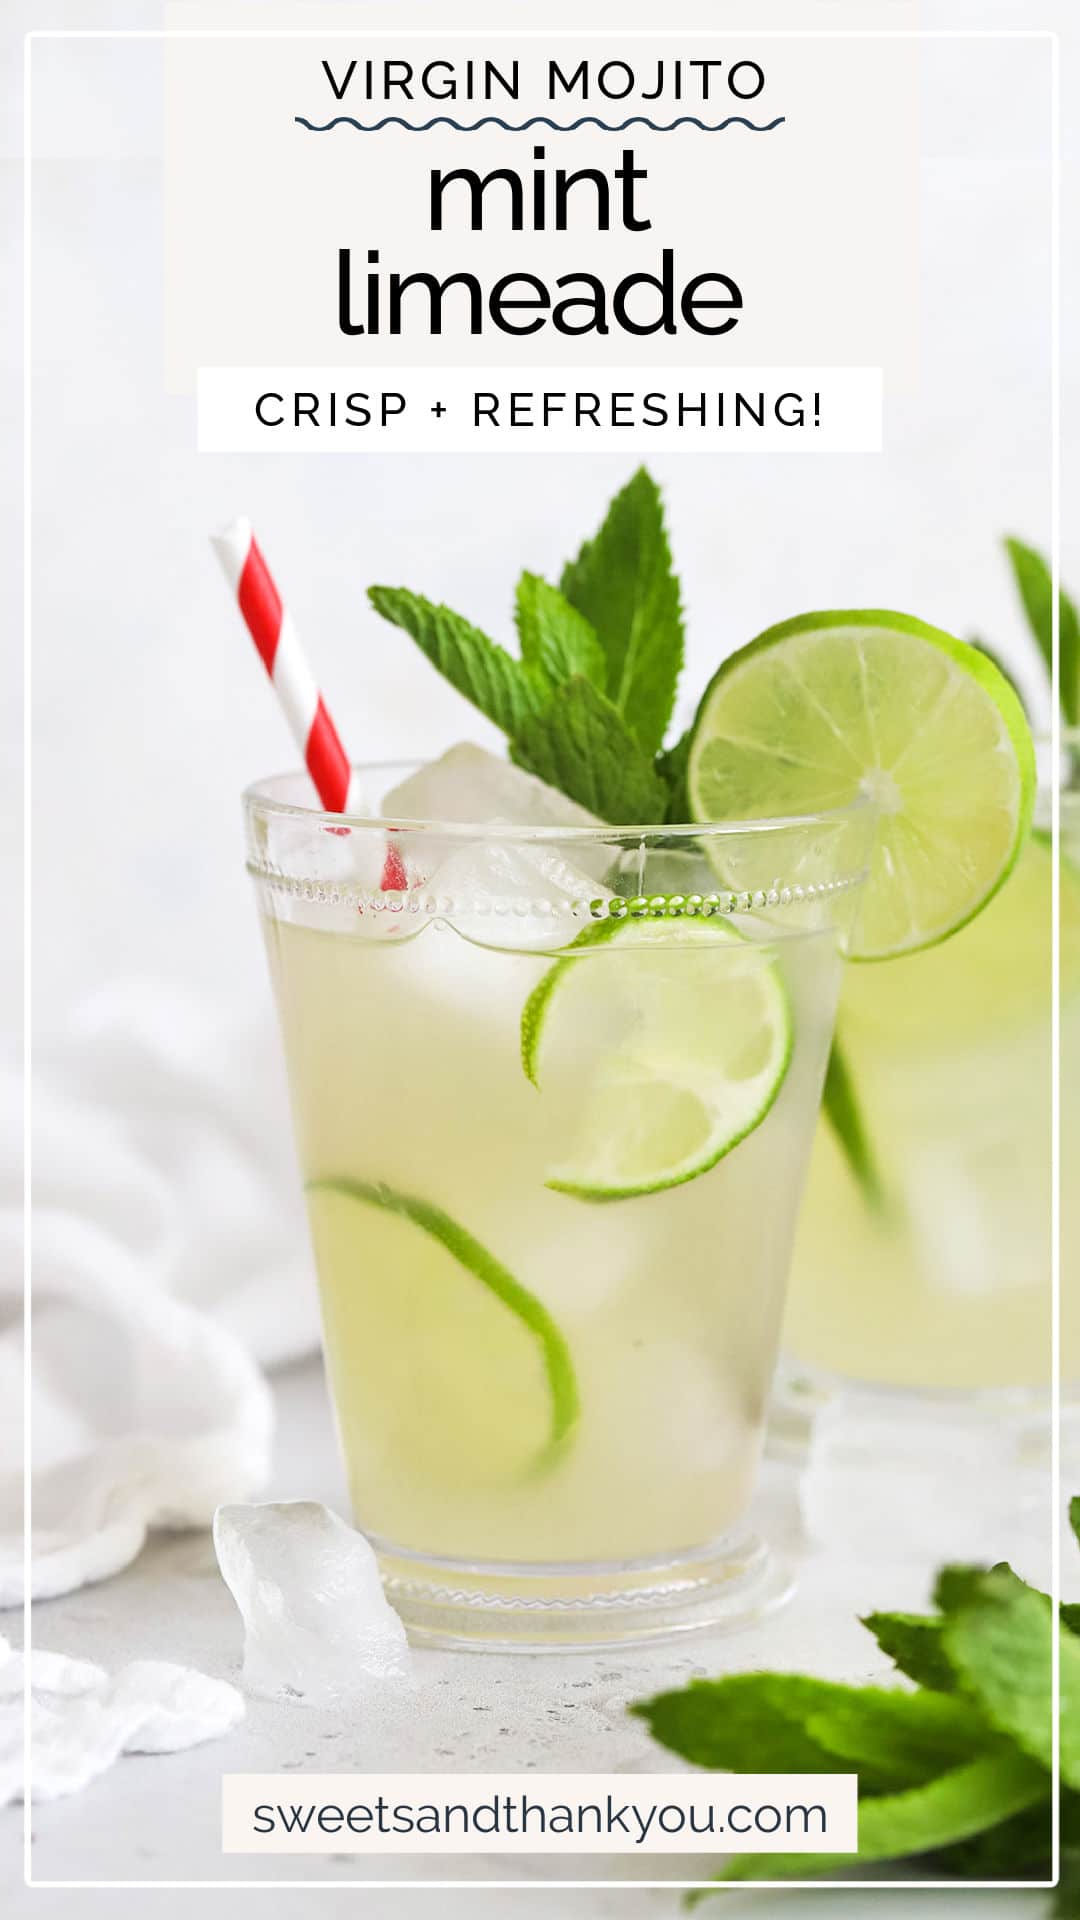 Mint Limeade AKA Virgin Mojitos! - This homemade limeade is kissed with fresh mint & tastes amazing. It's the perfect non-alcoholic drink for a celebration! // non alcoholic mojitos // virgin mojito recipe // homemade limeade recipe // cafe rio limeade / mocktail / lime mocktail / summer mocktail / summer drink / limeade from scratch / lime lemonade / lime drink recipe / lime drinks